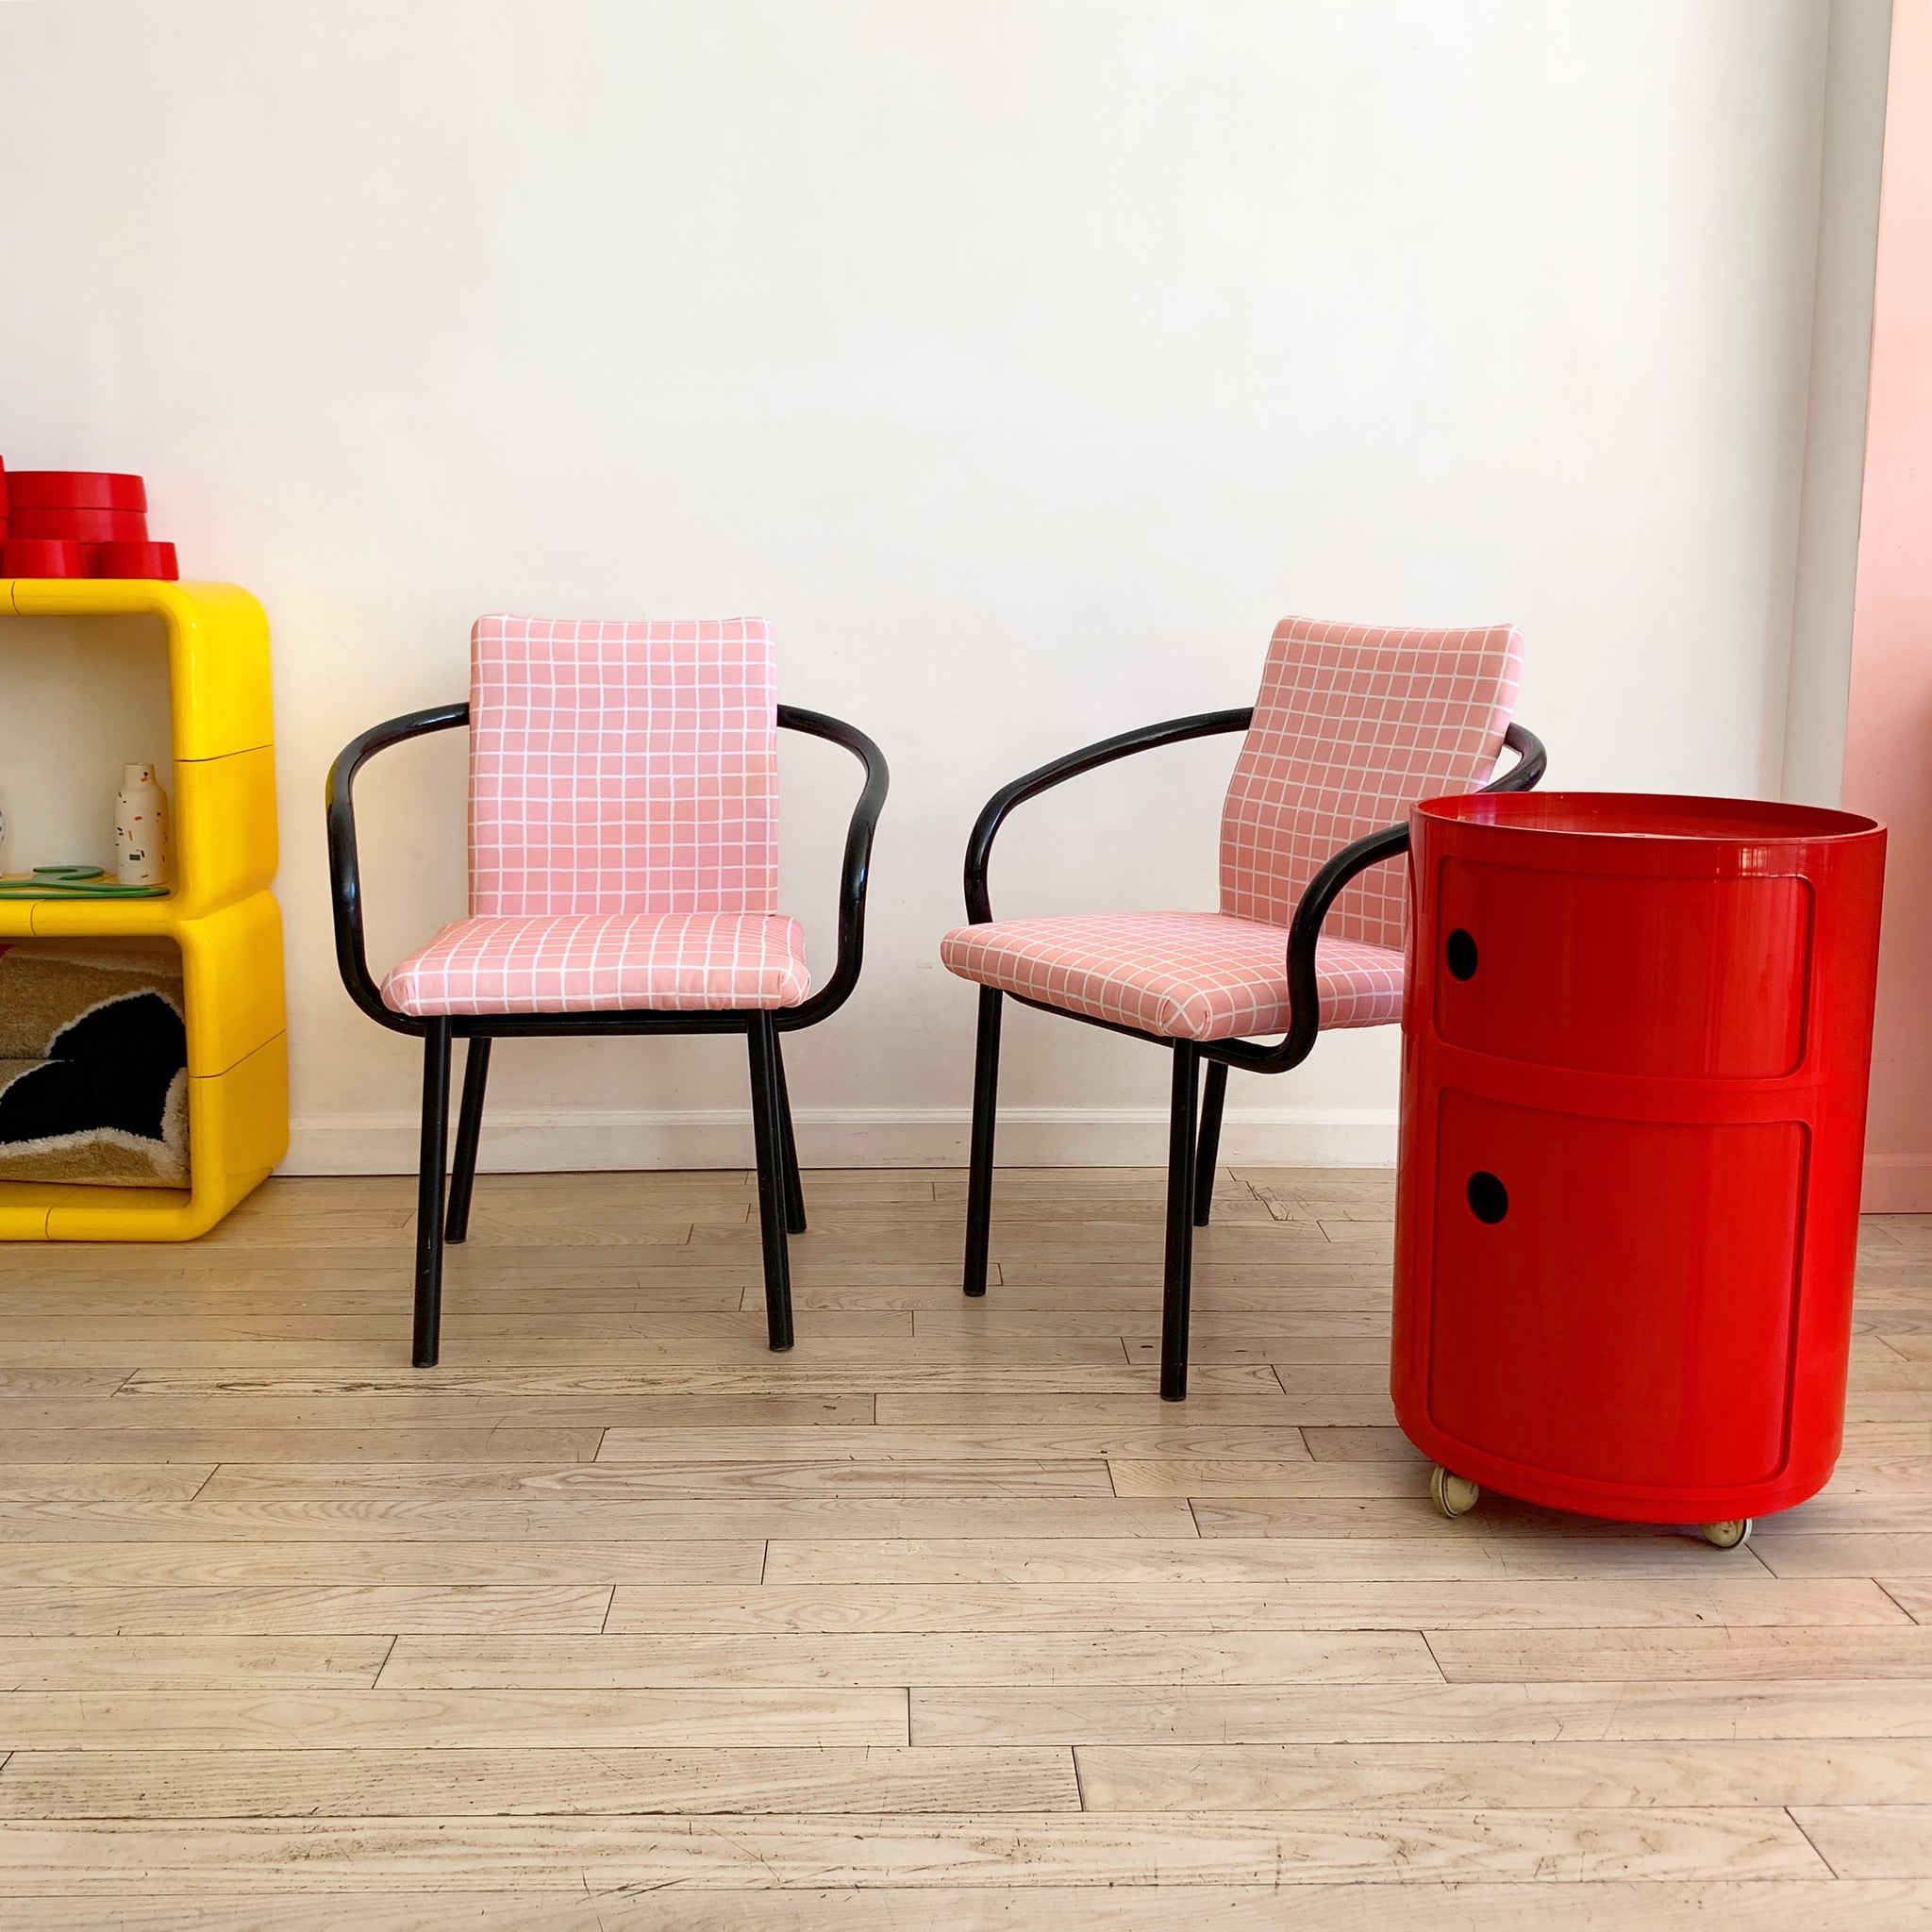 Vintage Ettore Sottsass for Knoll Mandarin Chair in Pink Grid